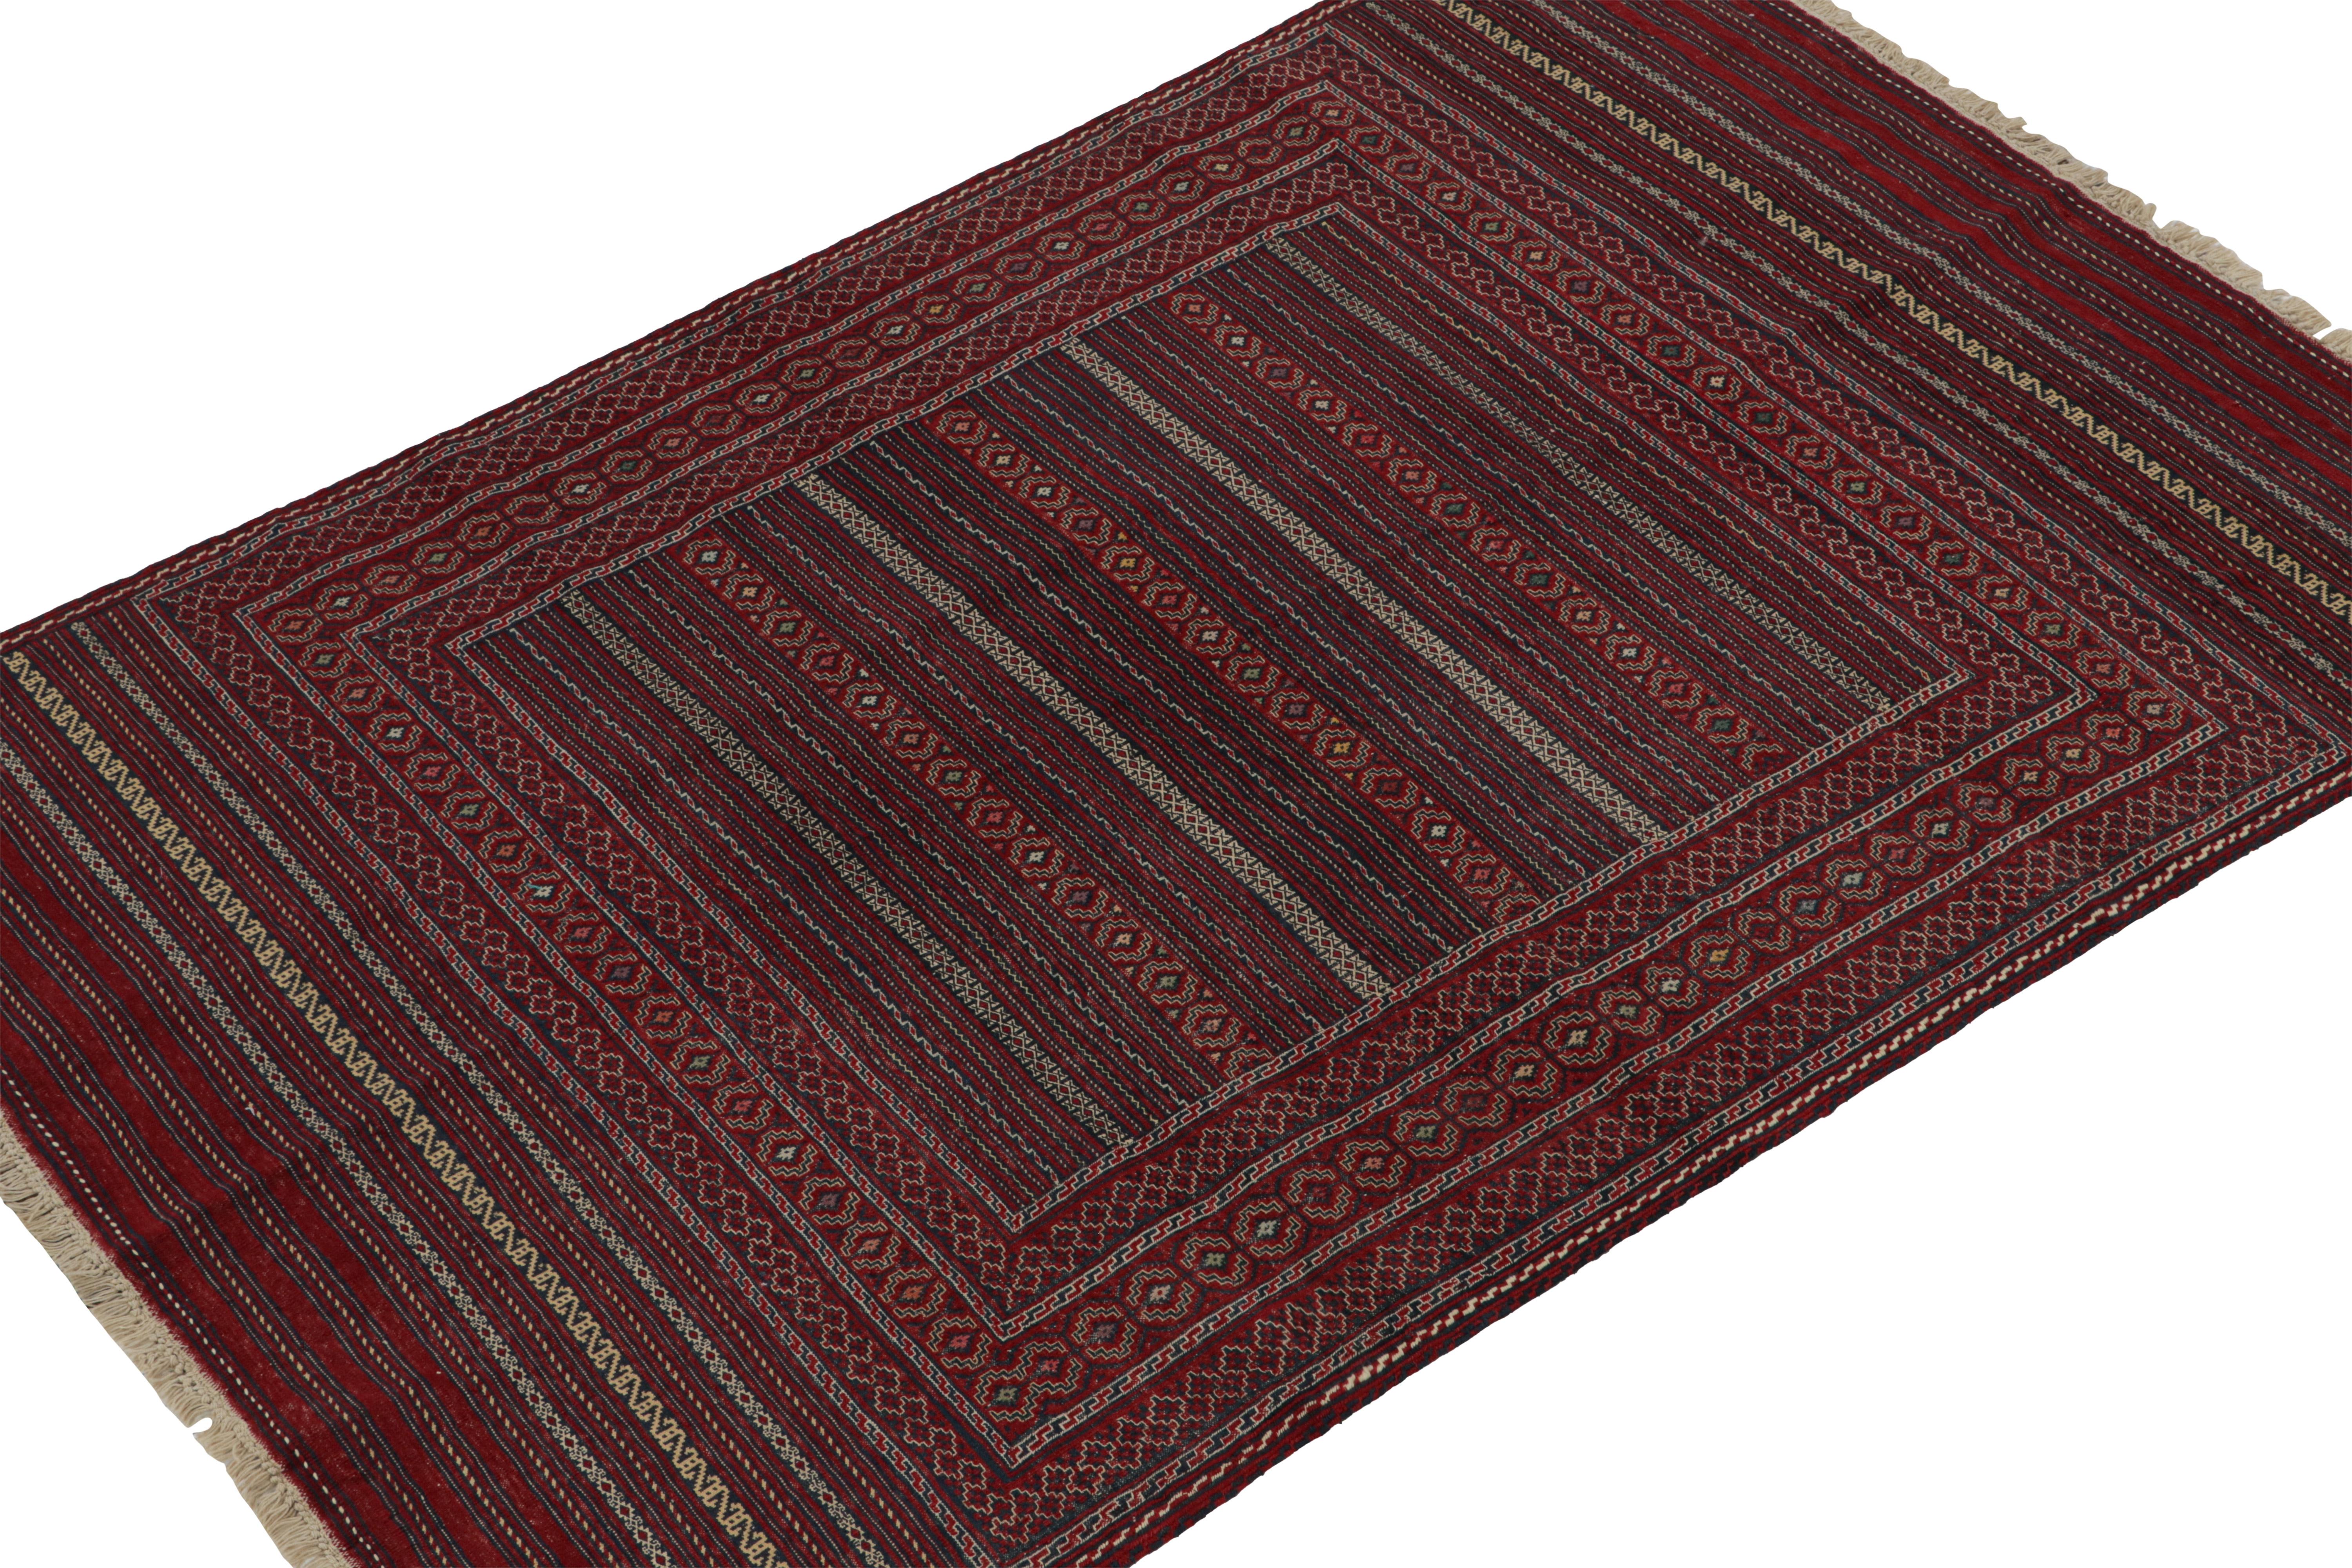 Handwoven in wool circa 1950-1960, this 4x6 vintage Baluch Kilim  is a new curation from Rug & Kilim’s primitivist flatweaves. 

On the Design:

Specifically believed to be coming from the Leghari clan of the Baluch tribe, this 4x6 flatweave boasts